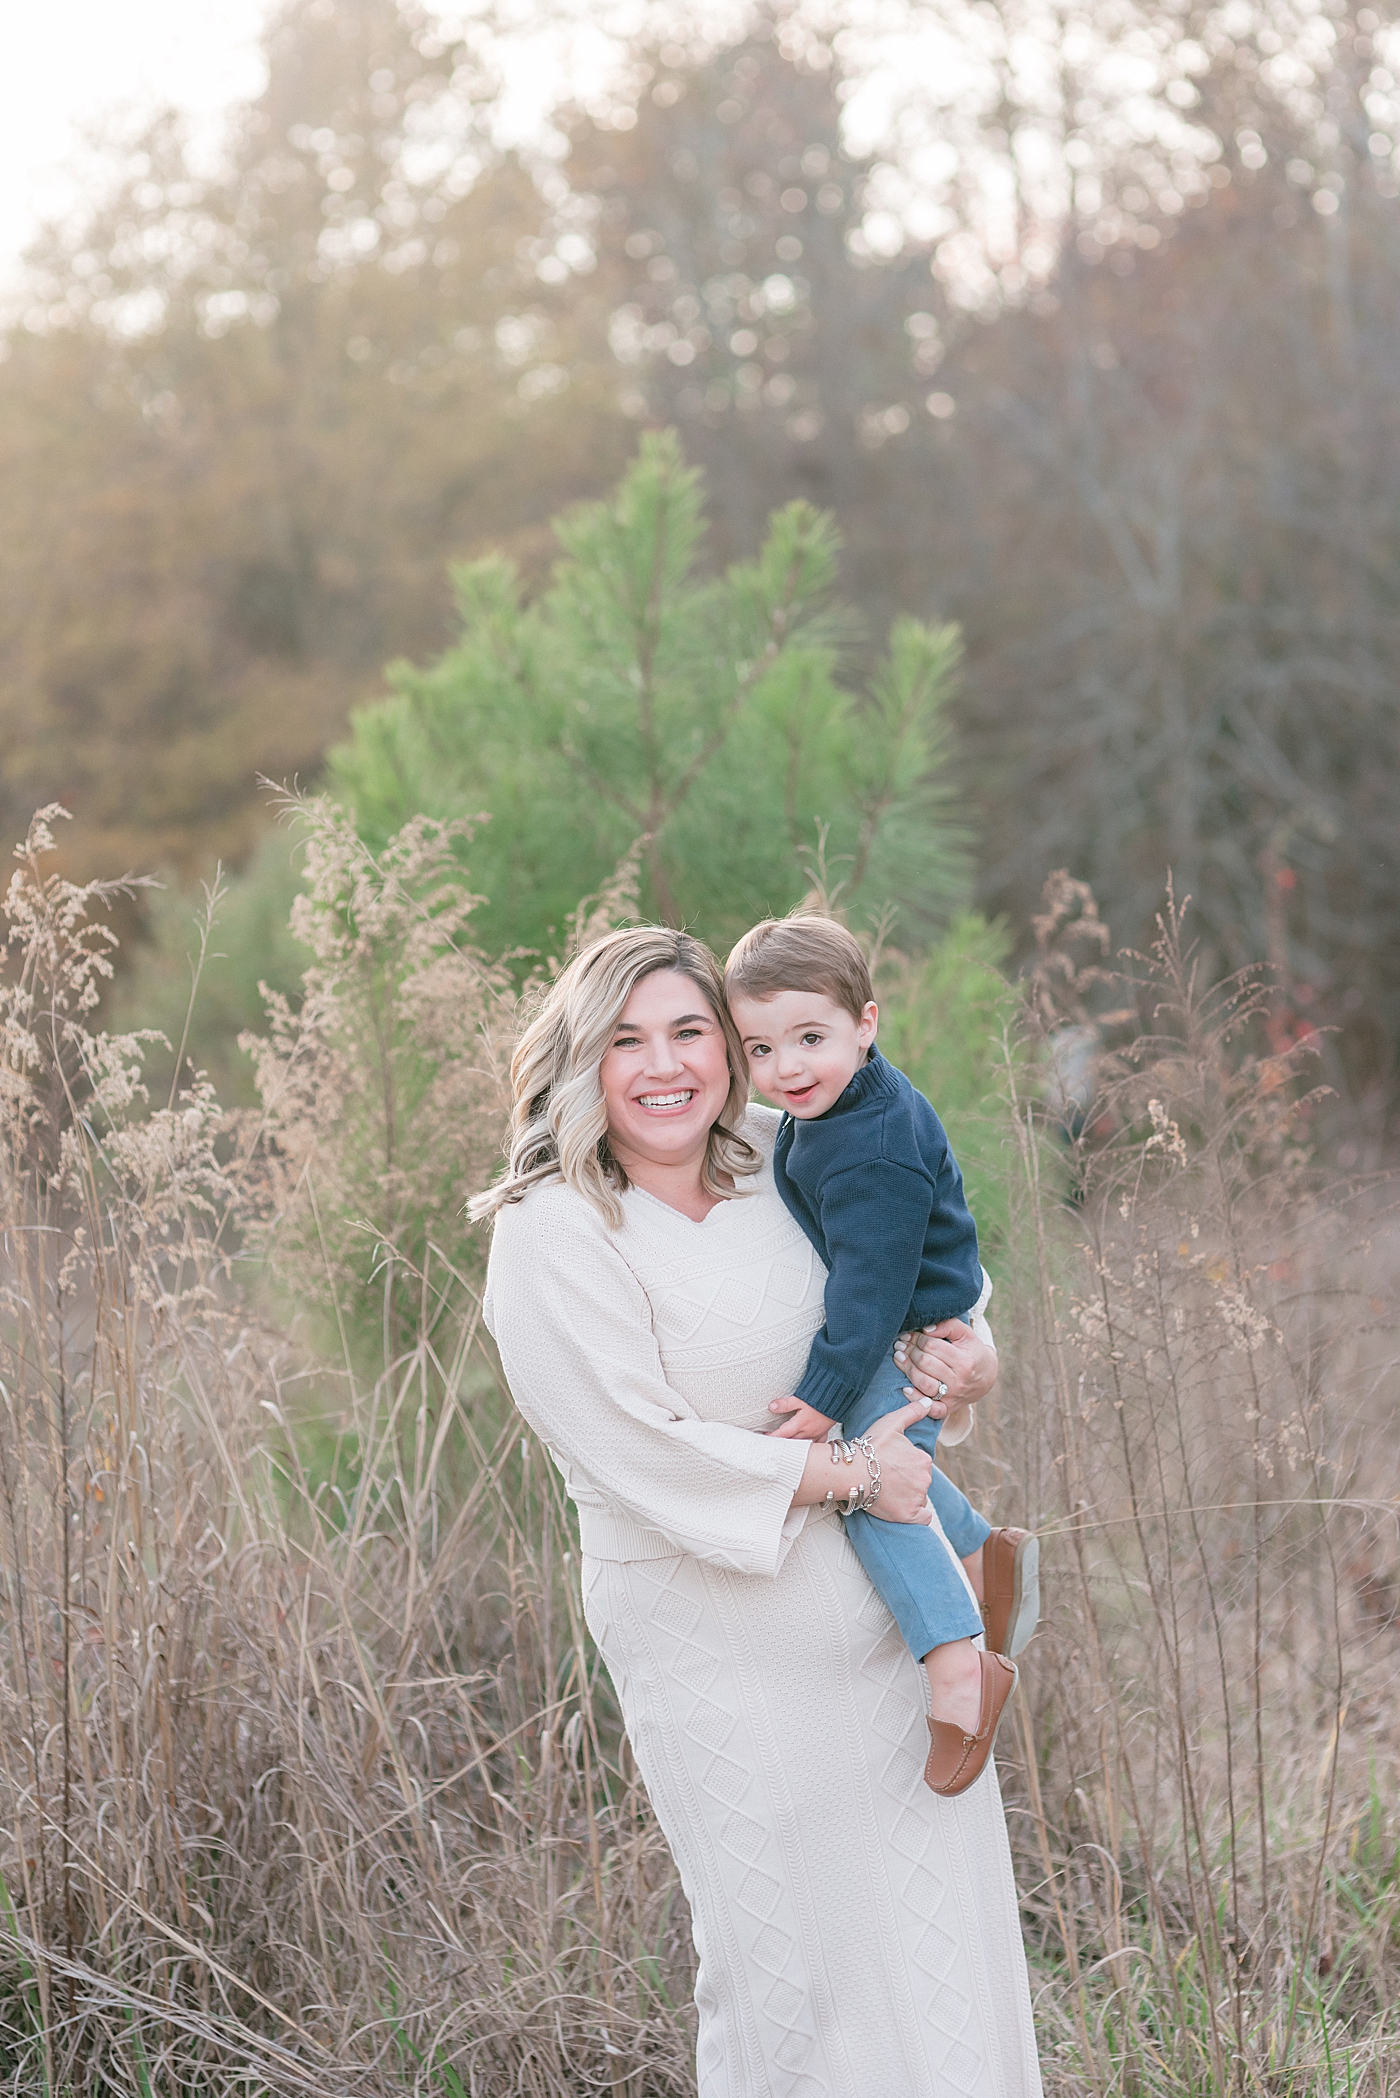 Mom and toddler boy smiling during Milestone Session at Marvin Efird Park | Photo by Anna Wisjo Photography 